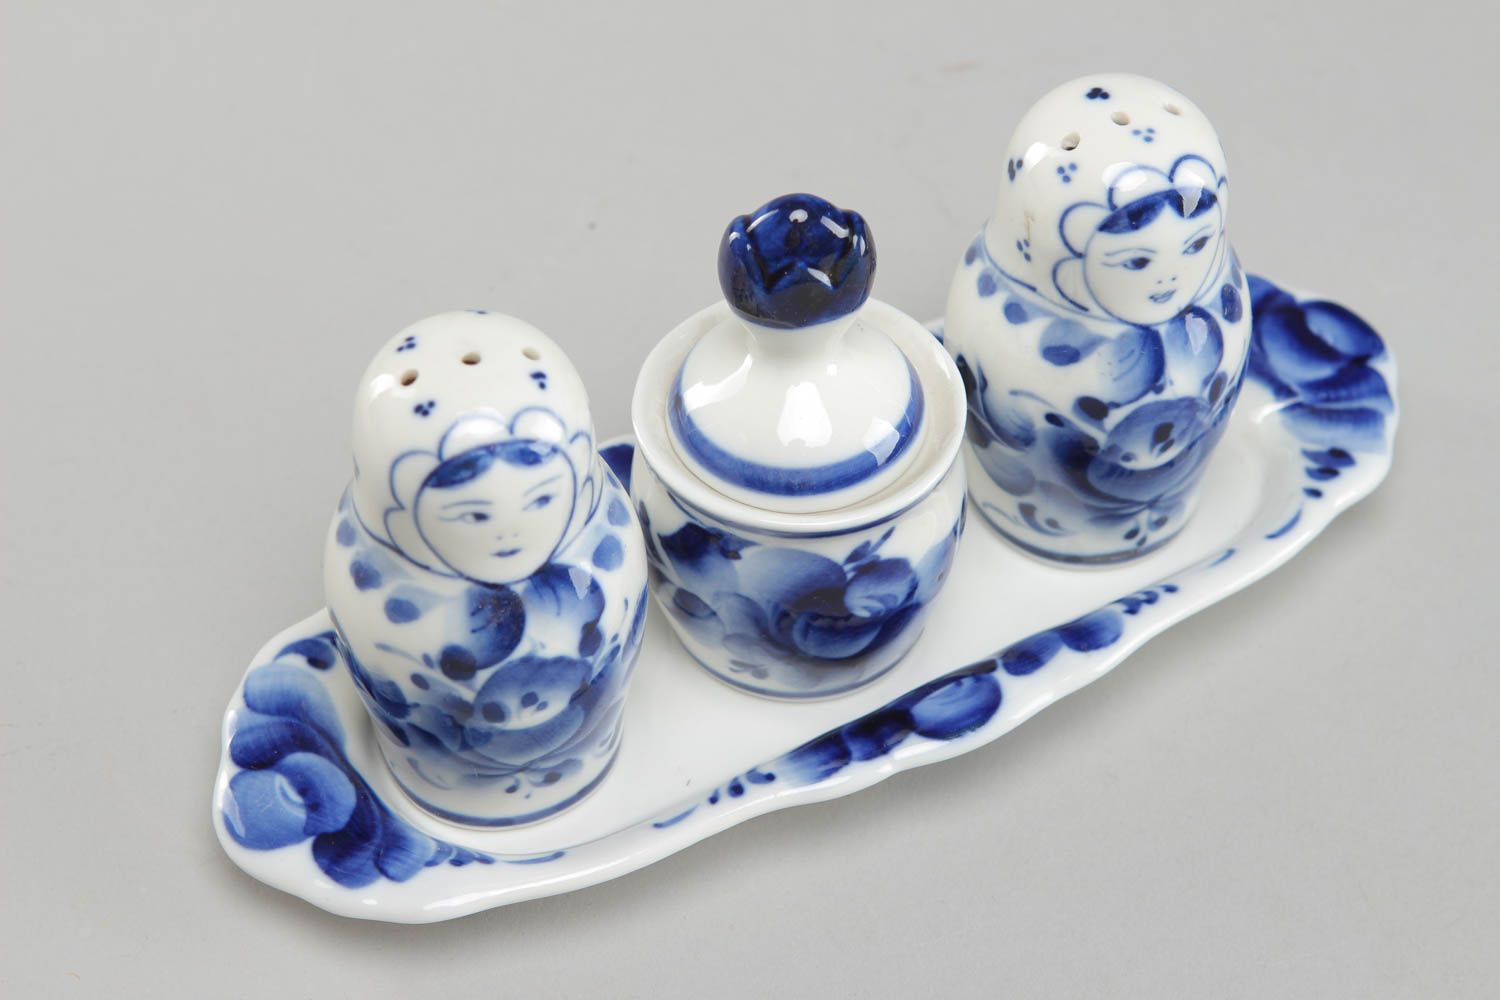 Set of ceramic salt and pepper shakers on the ceramic tray for table décor in white and blue colors 1 lb photo 2